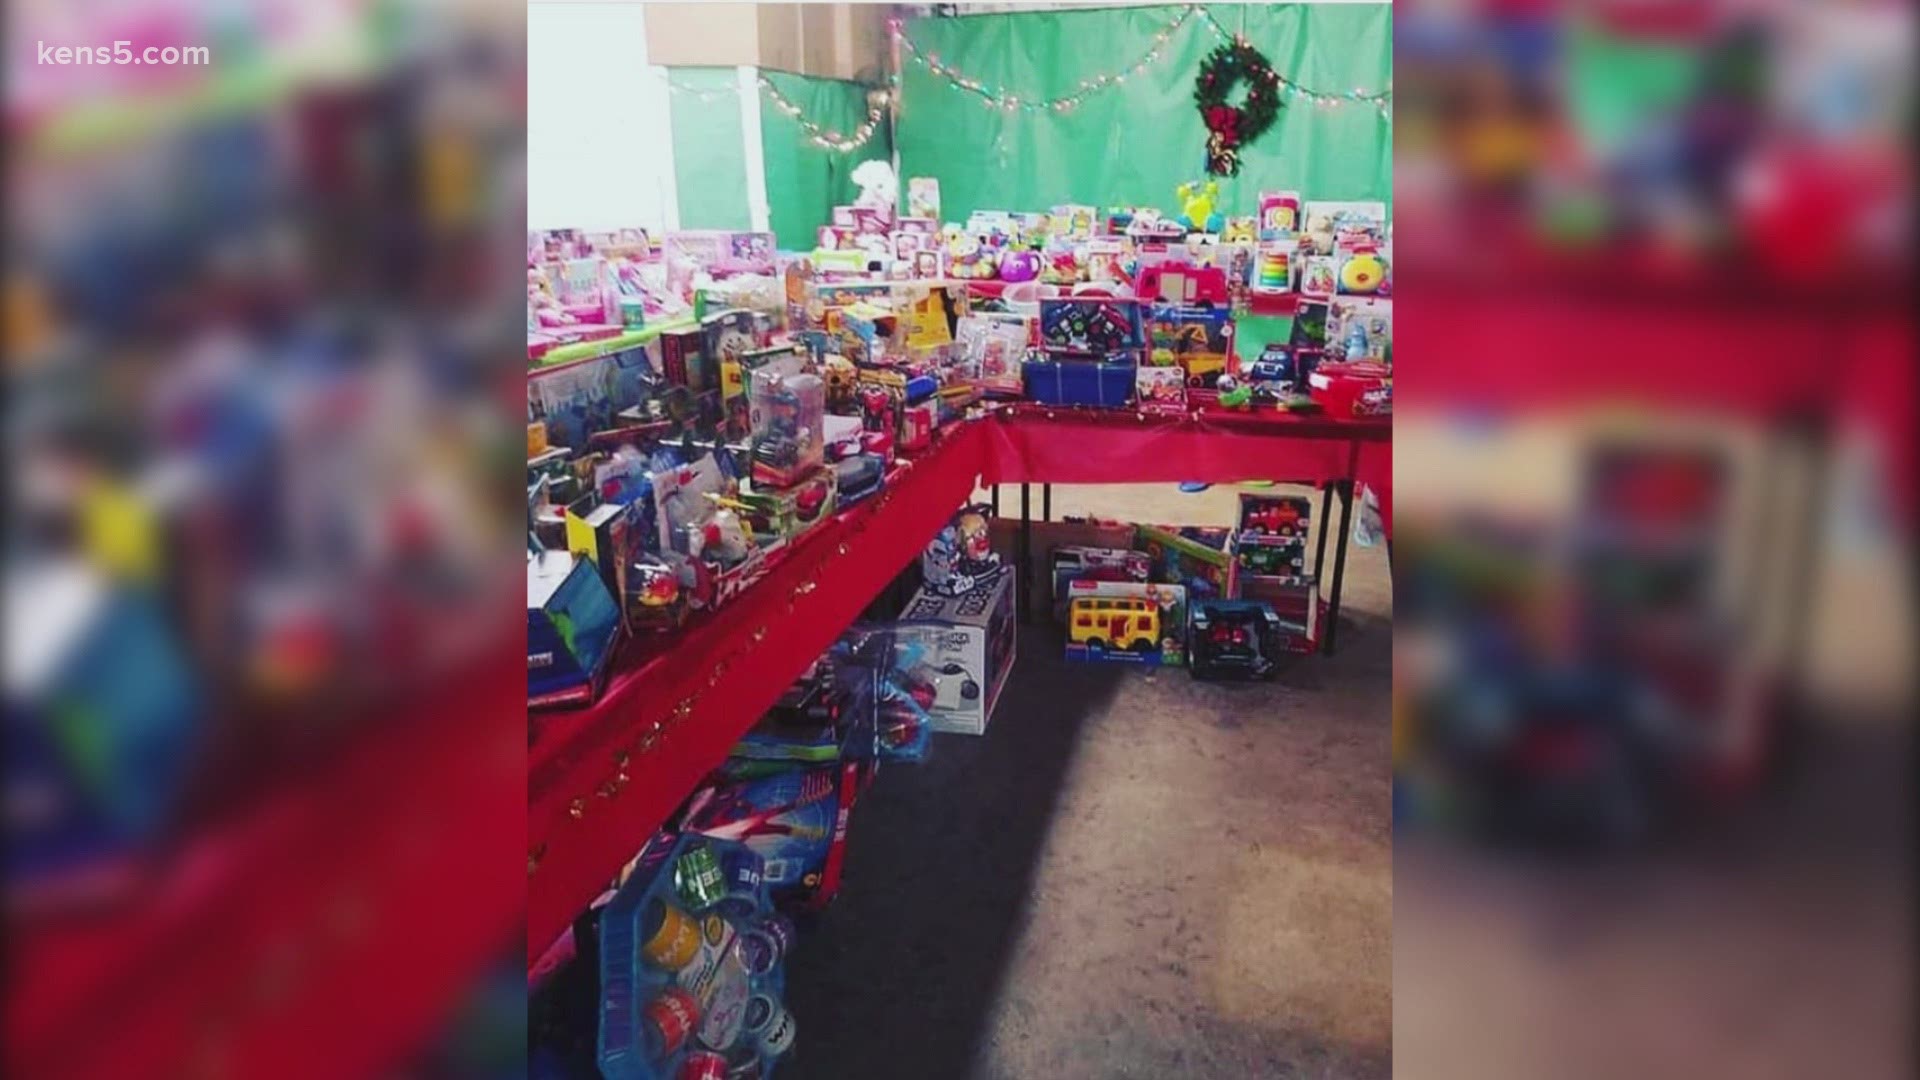 A local toy drive is going on to make sure about a thousand children get presents on Christmas.